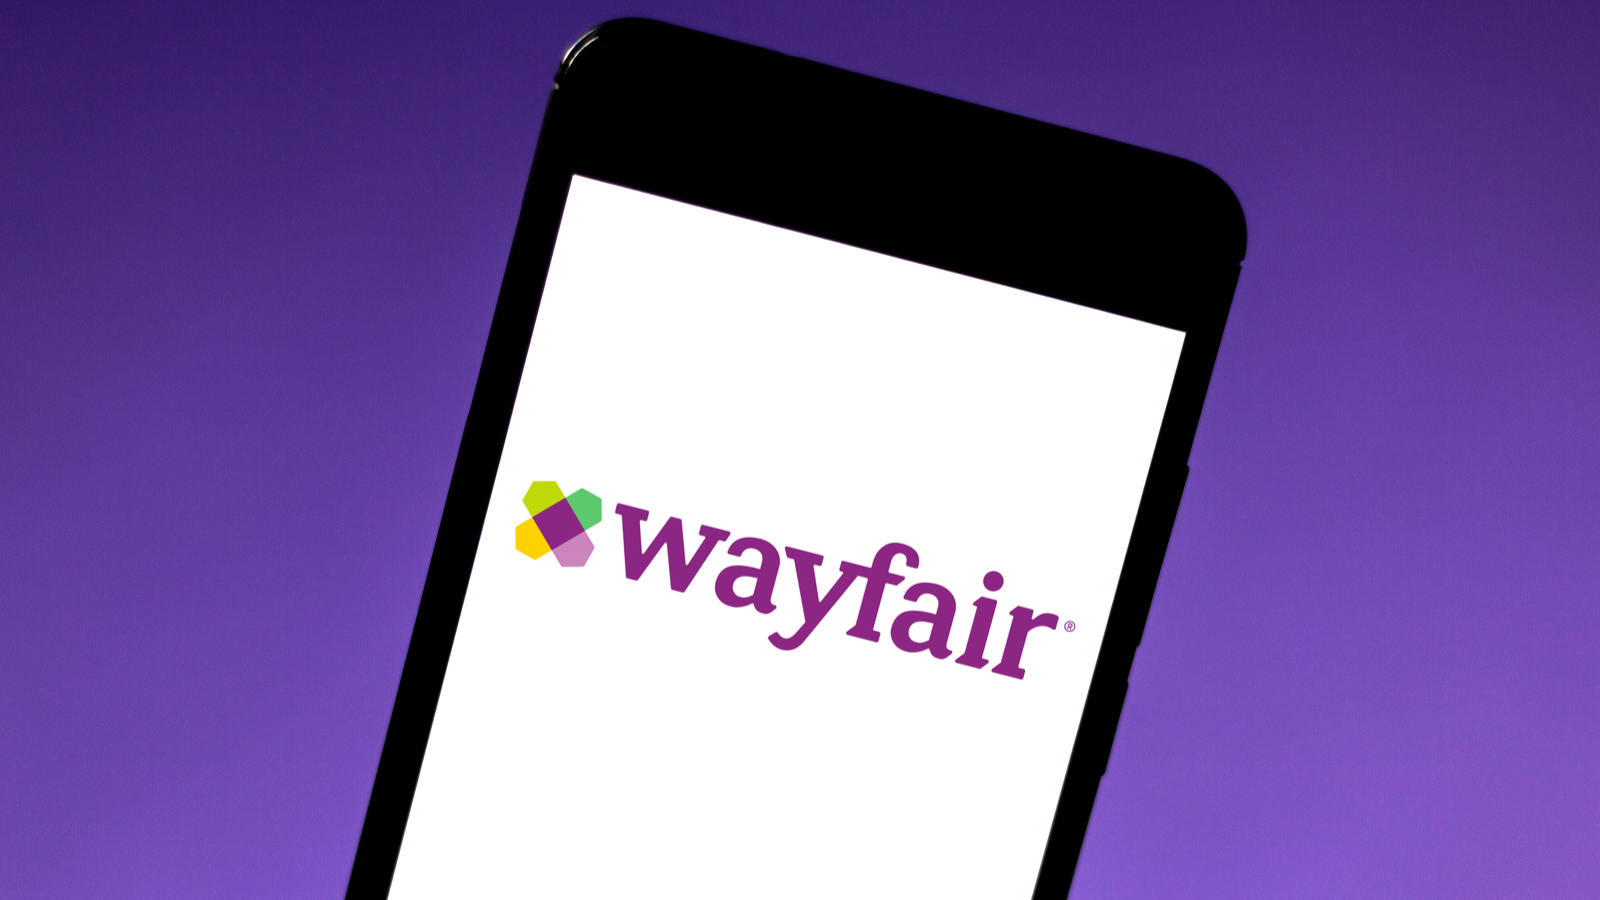 The Wayfair (W Stock) logo on the screen of a mobile phone with a purple background